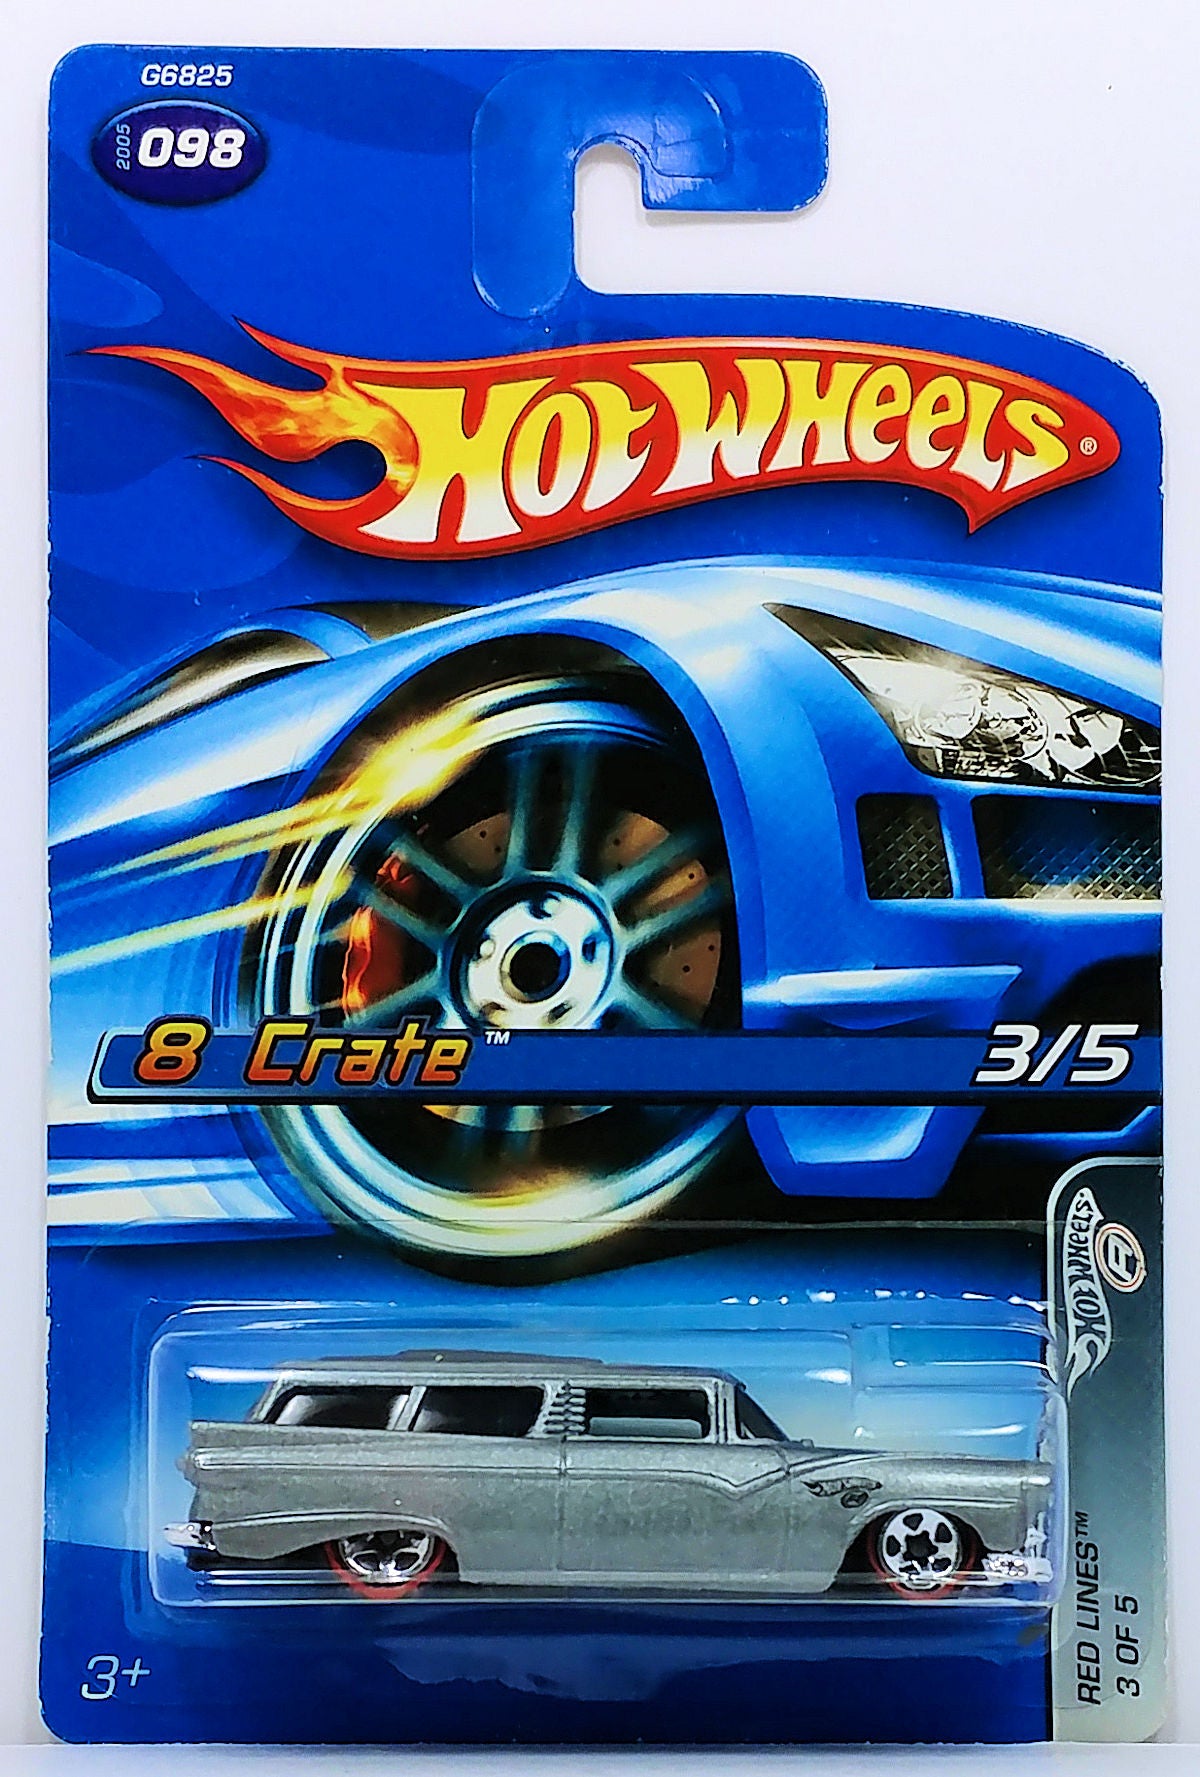 Hot Wheels 2005 - Collector # 098/183 - Red Lines 3/5 - 8 Crate - Gray Metallic - 5 Spokes with Redlines - Thailand - USA '06